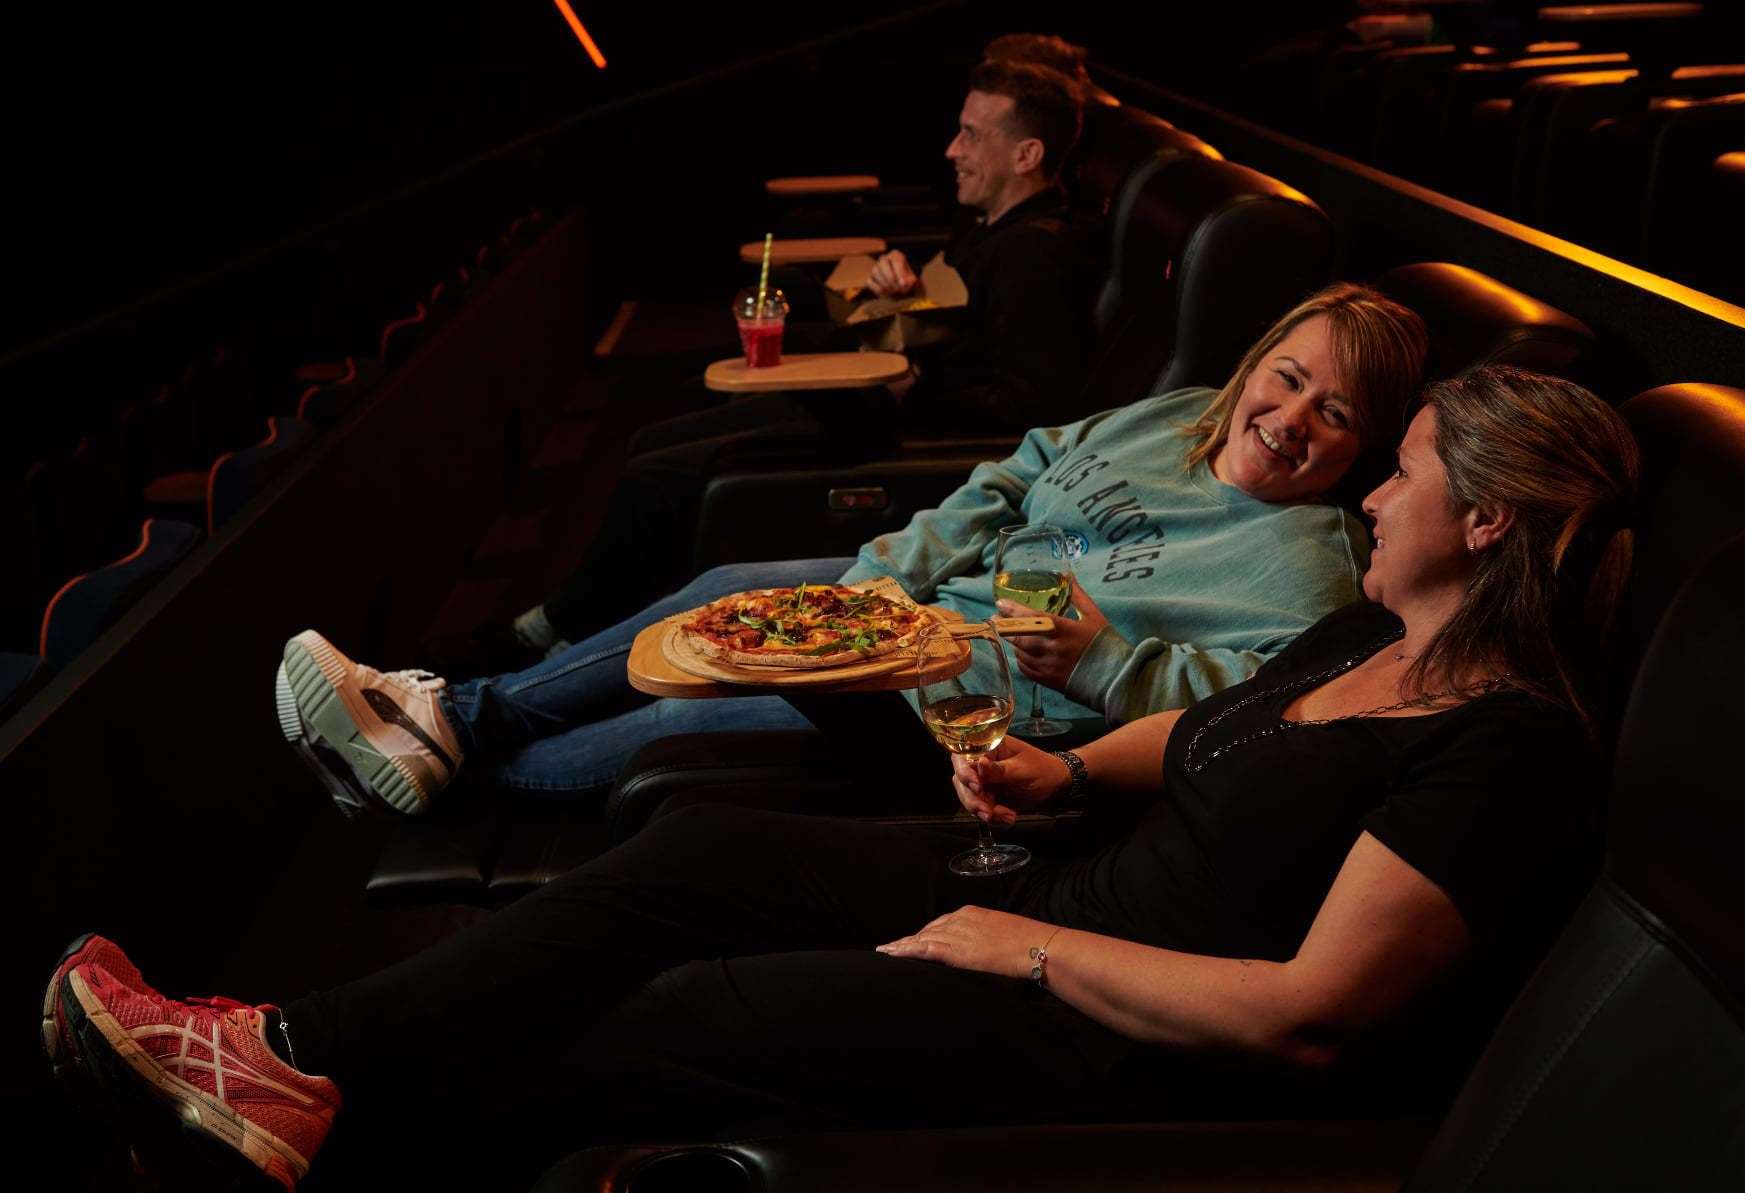 Going to the cinema is evolving - now it's all about a quality experience over the number of screens. Picture: The Light